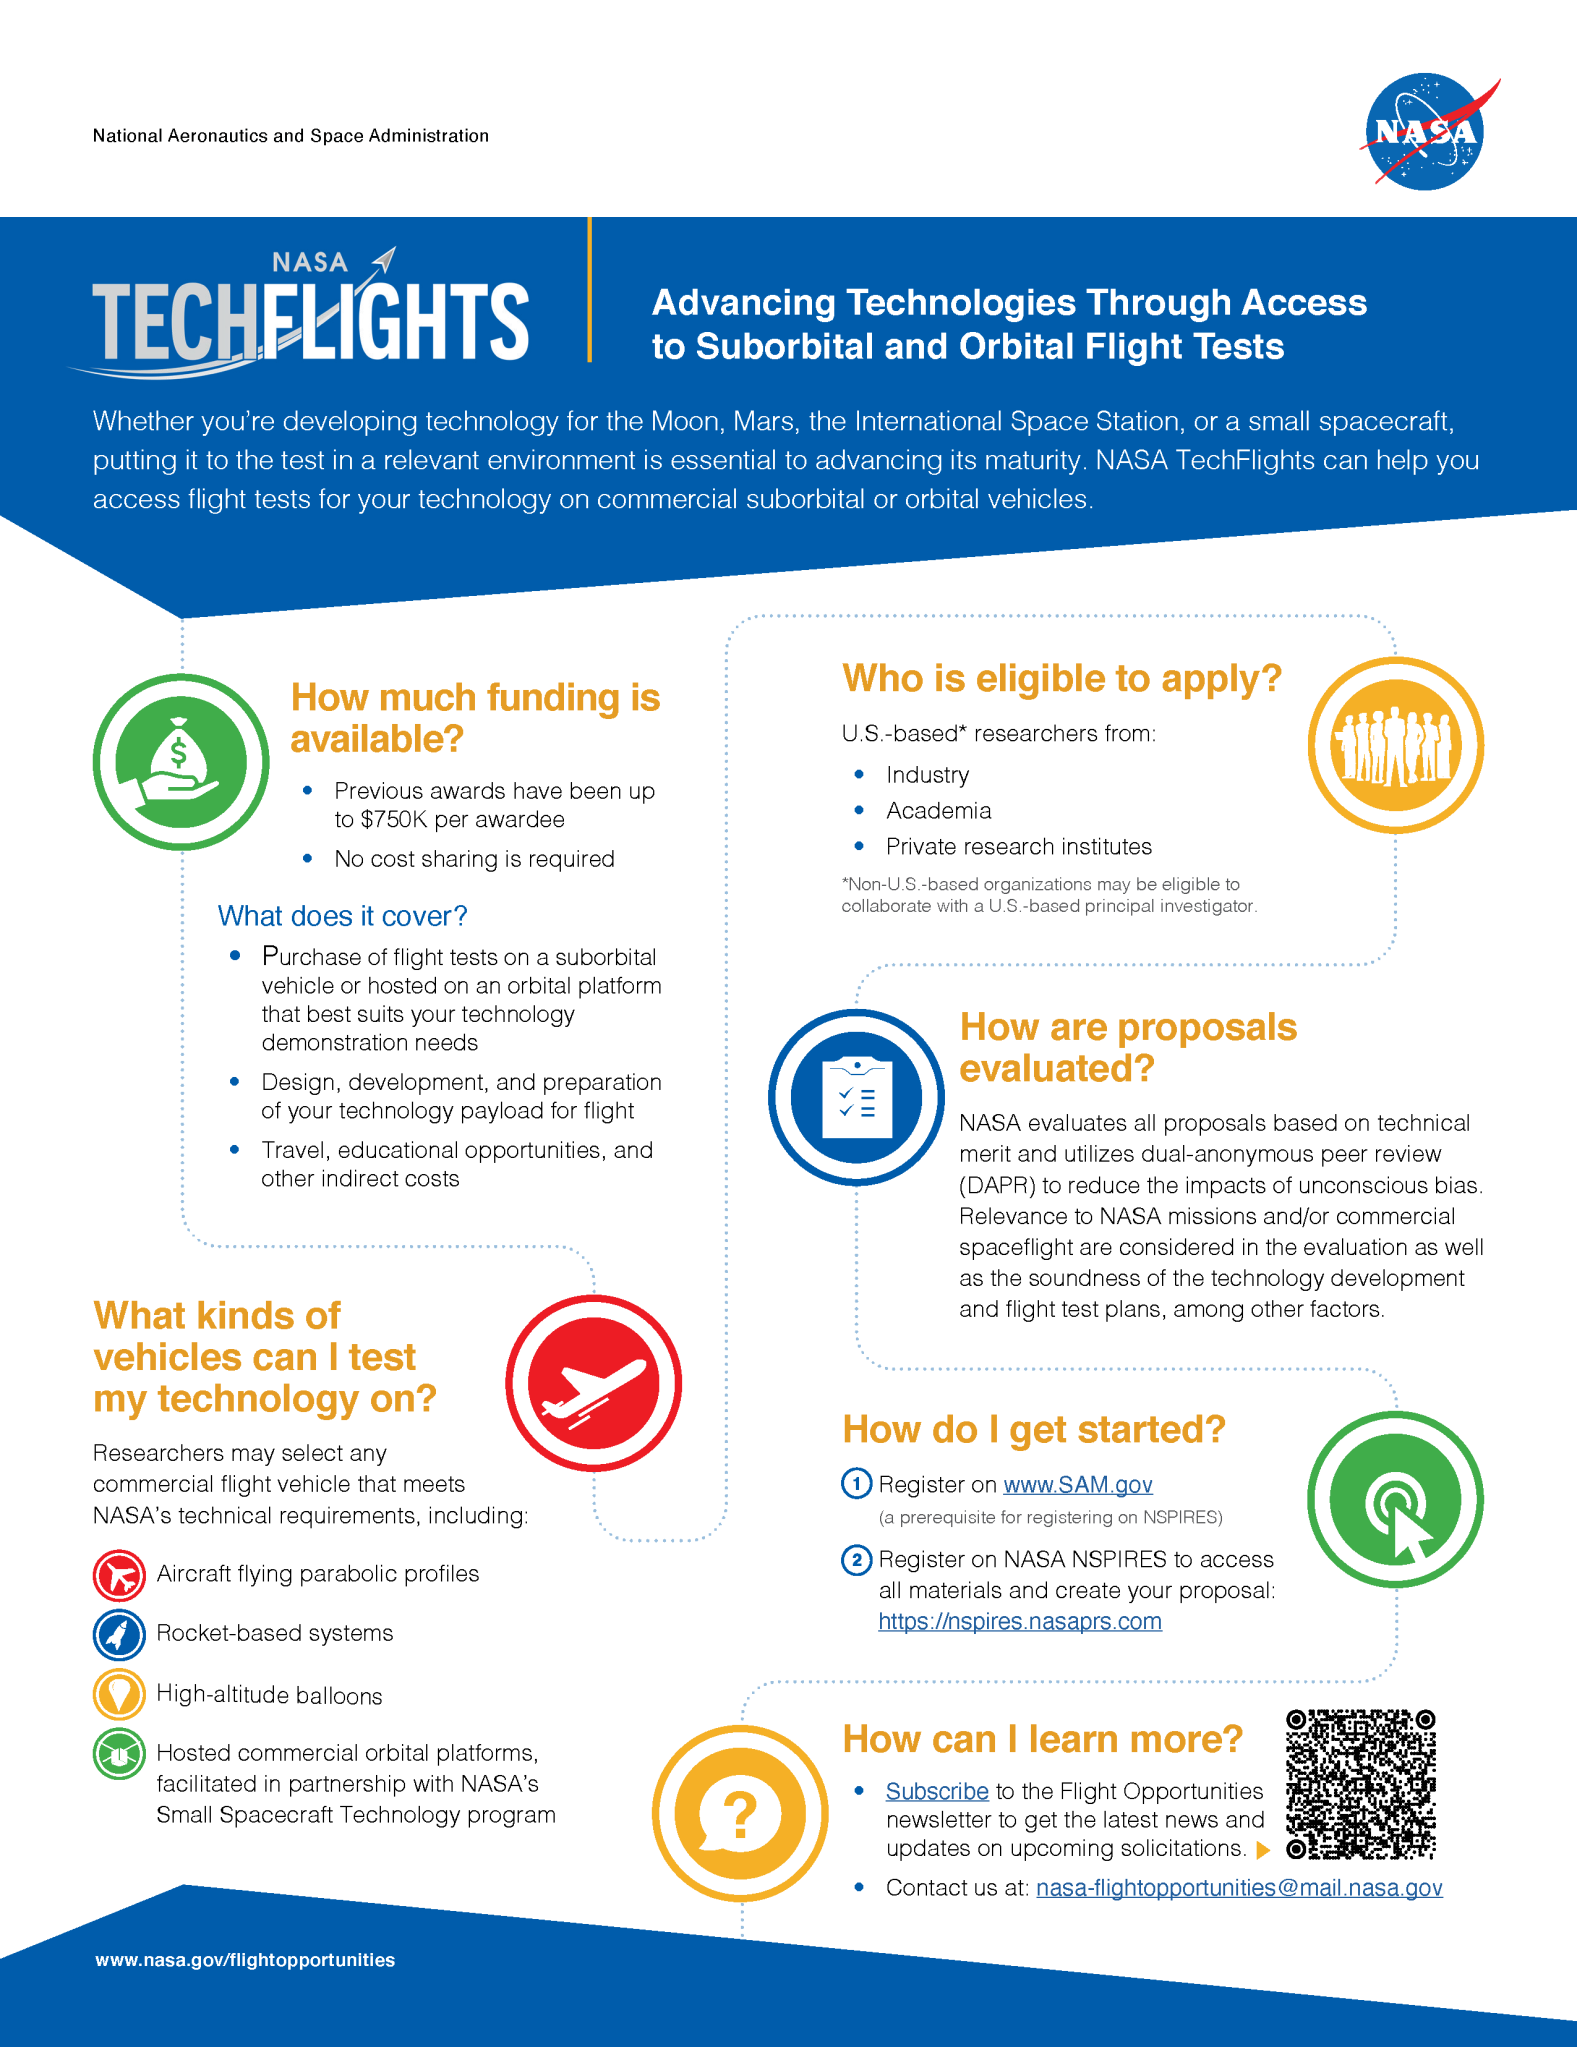 Explanation of the TechFlights opportunity; more details are on the Flight Opportunities website